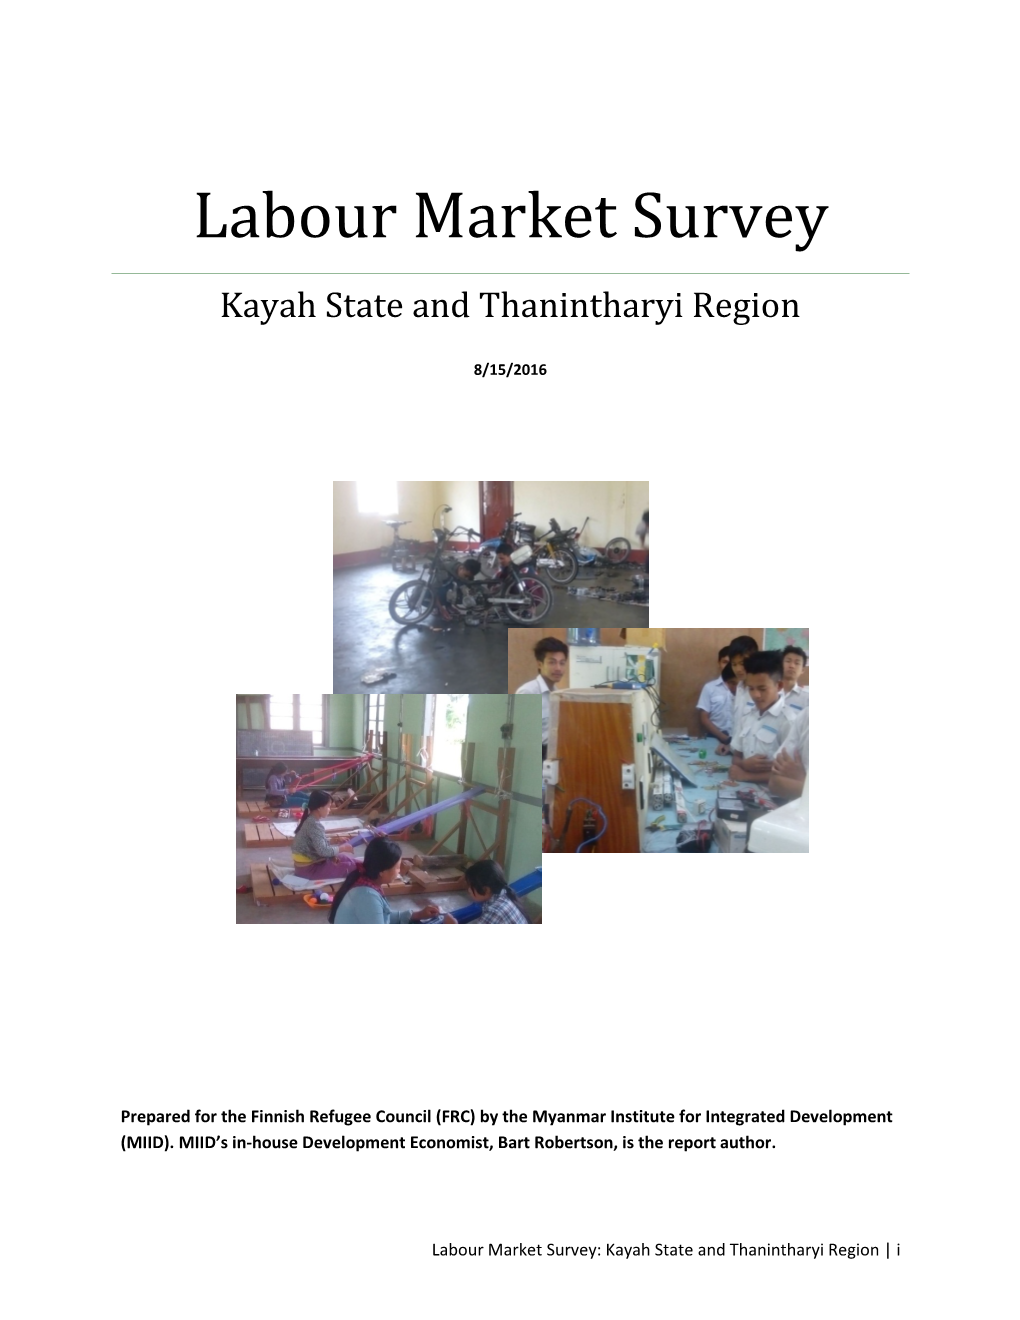 Labour Market Survey Kayah State and Thanintharyi Region